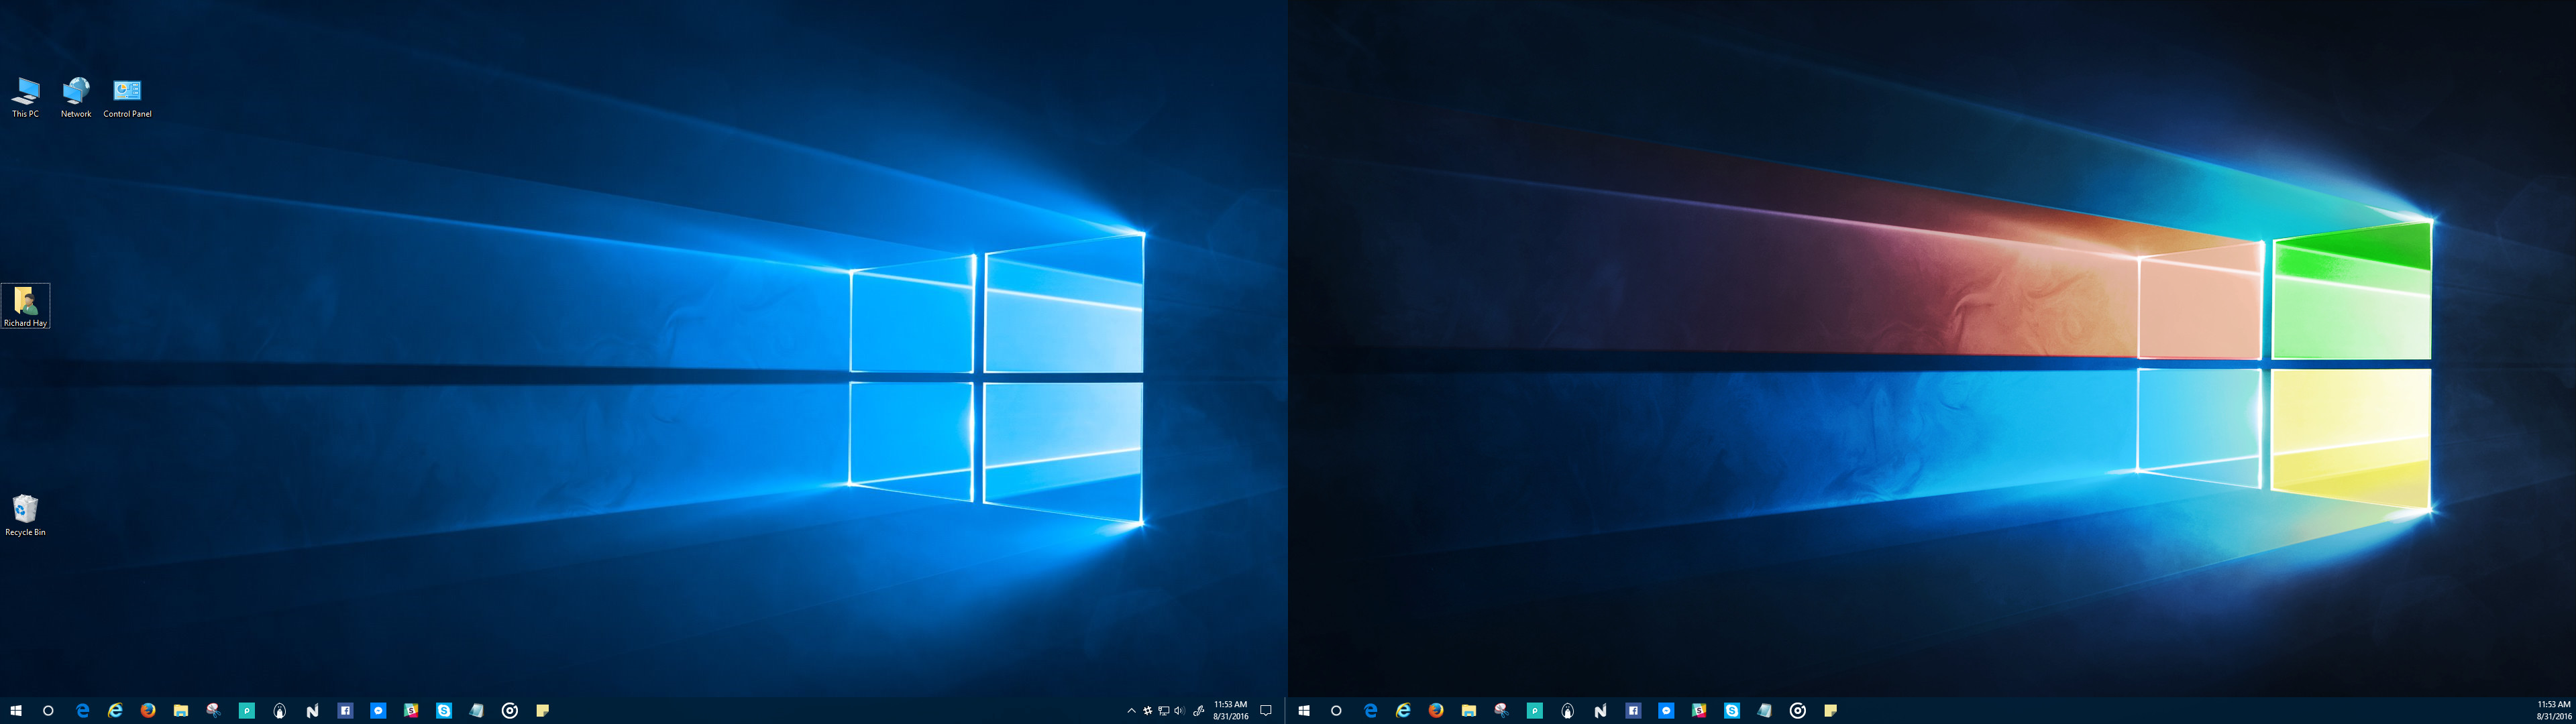 3840x1080 Dual Monitors with Different Backgrounds in Windows 10